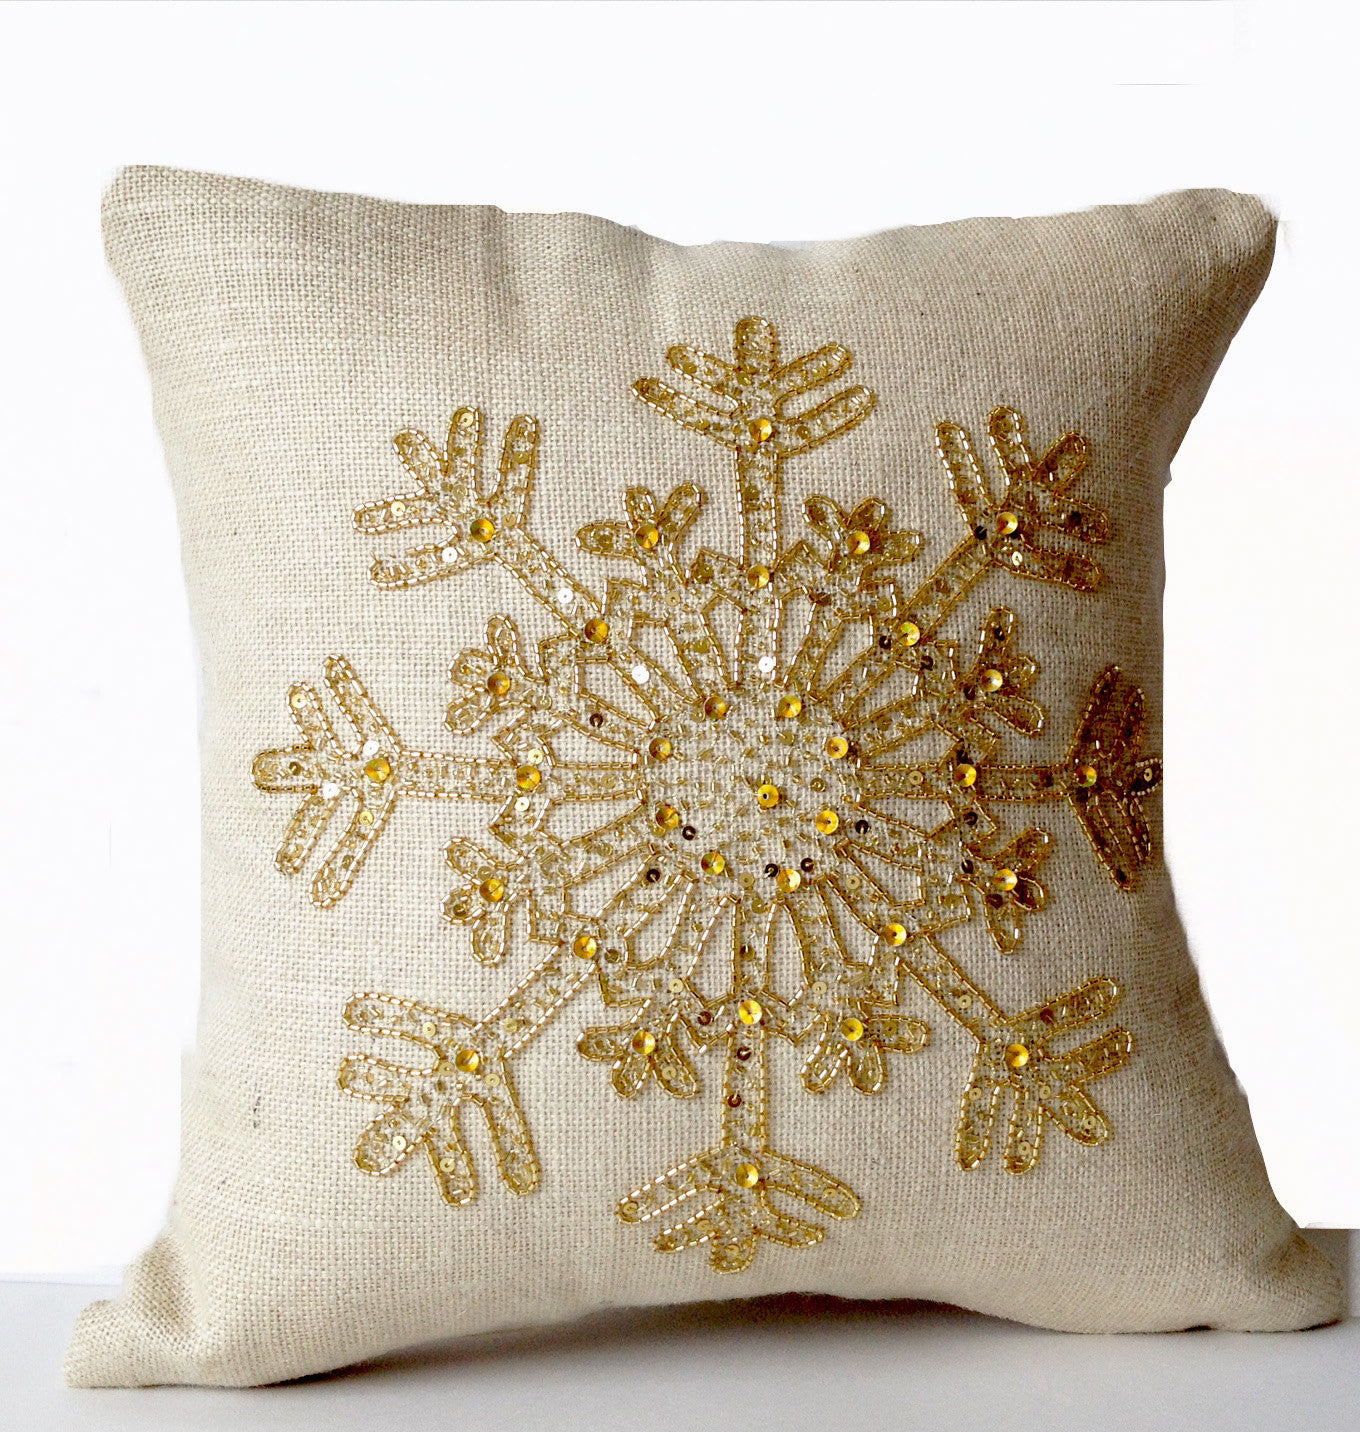 Handmade burlap pillow cover with gold snowflake